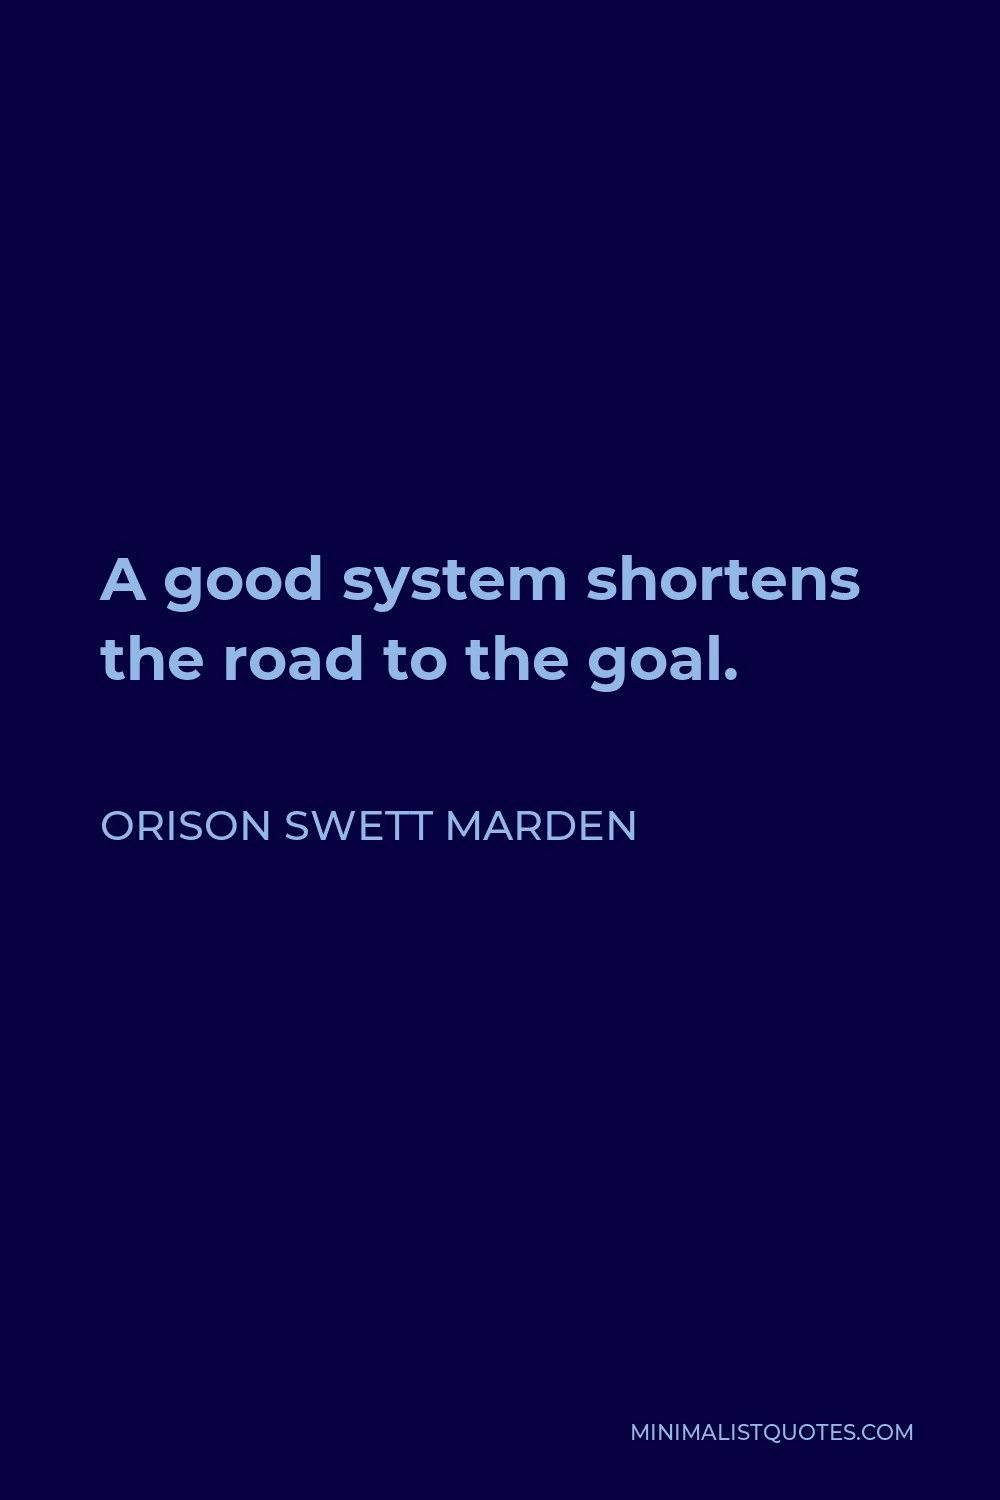 Orison Swett Marden Quote: A good system shortens the road to the